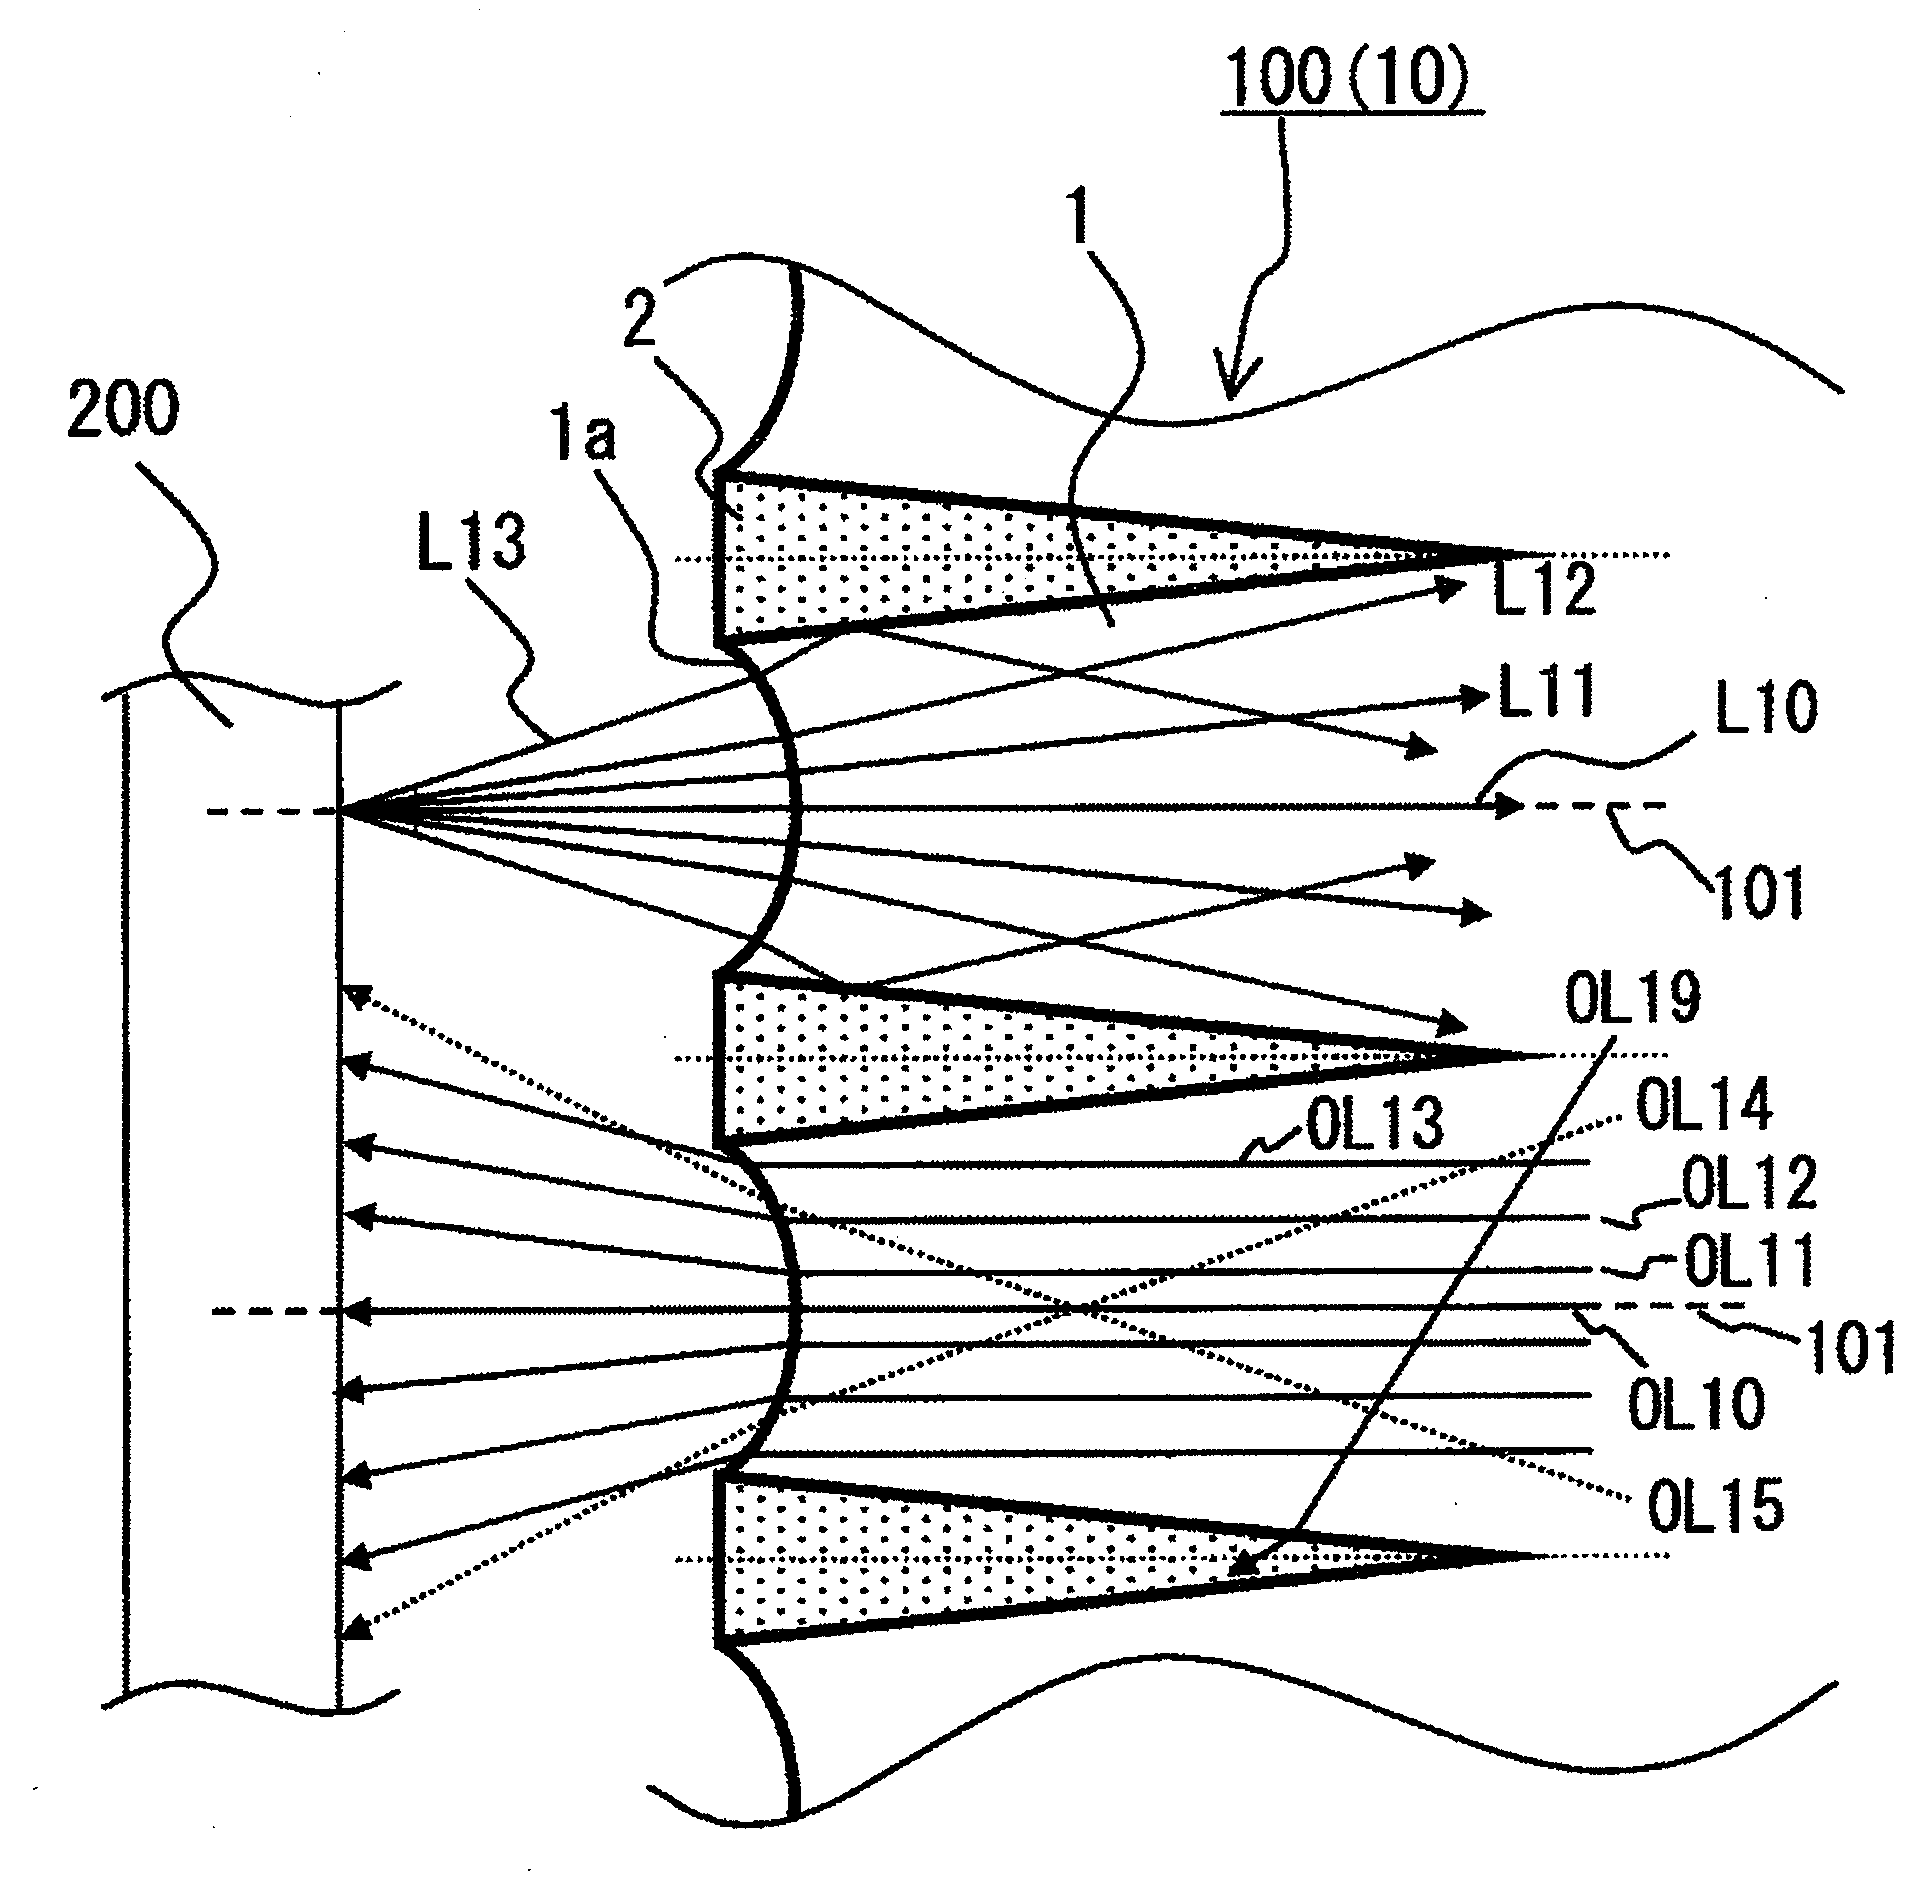 Optical sheet and display unit using the same